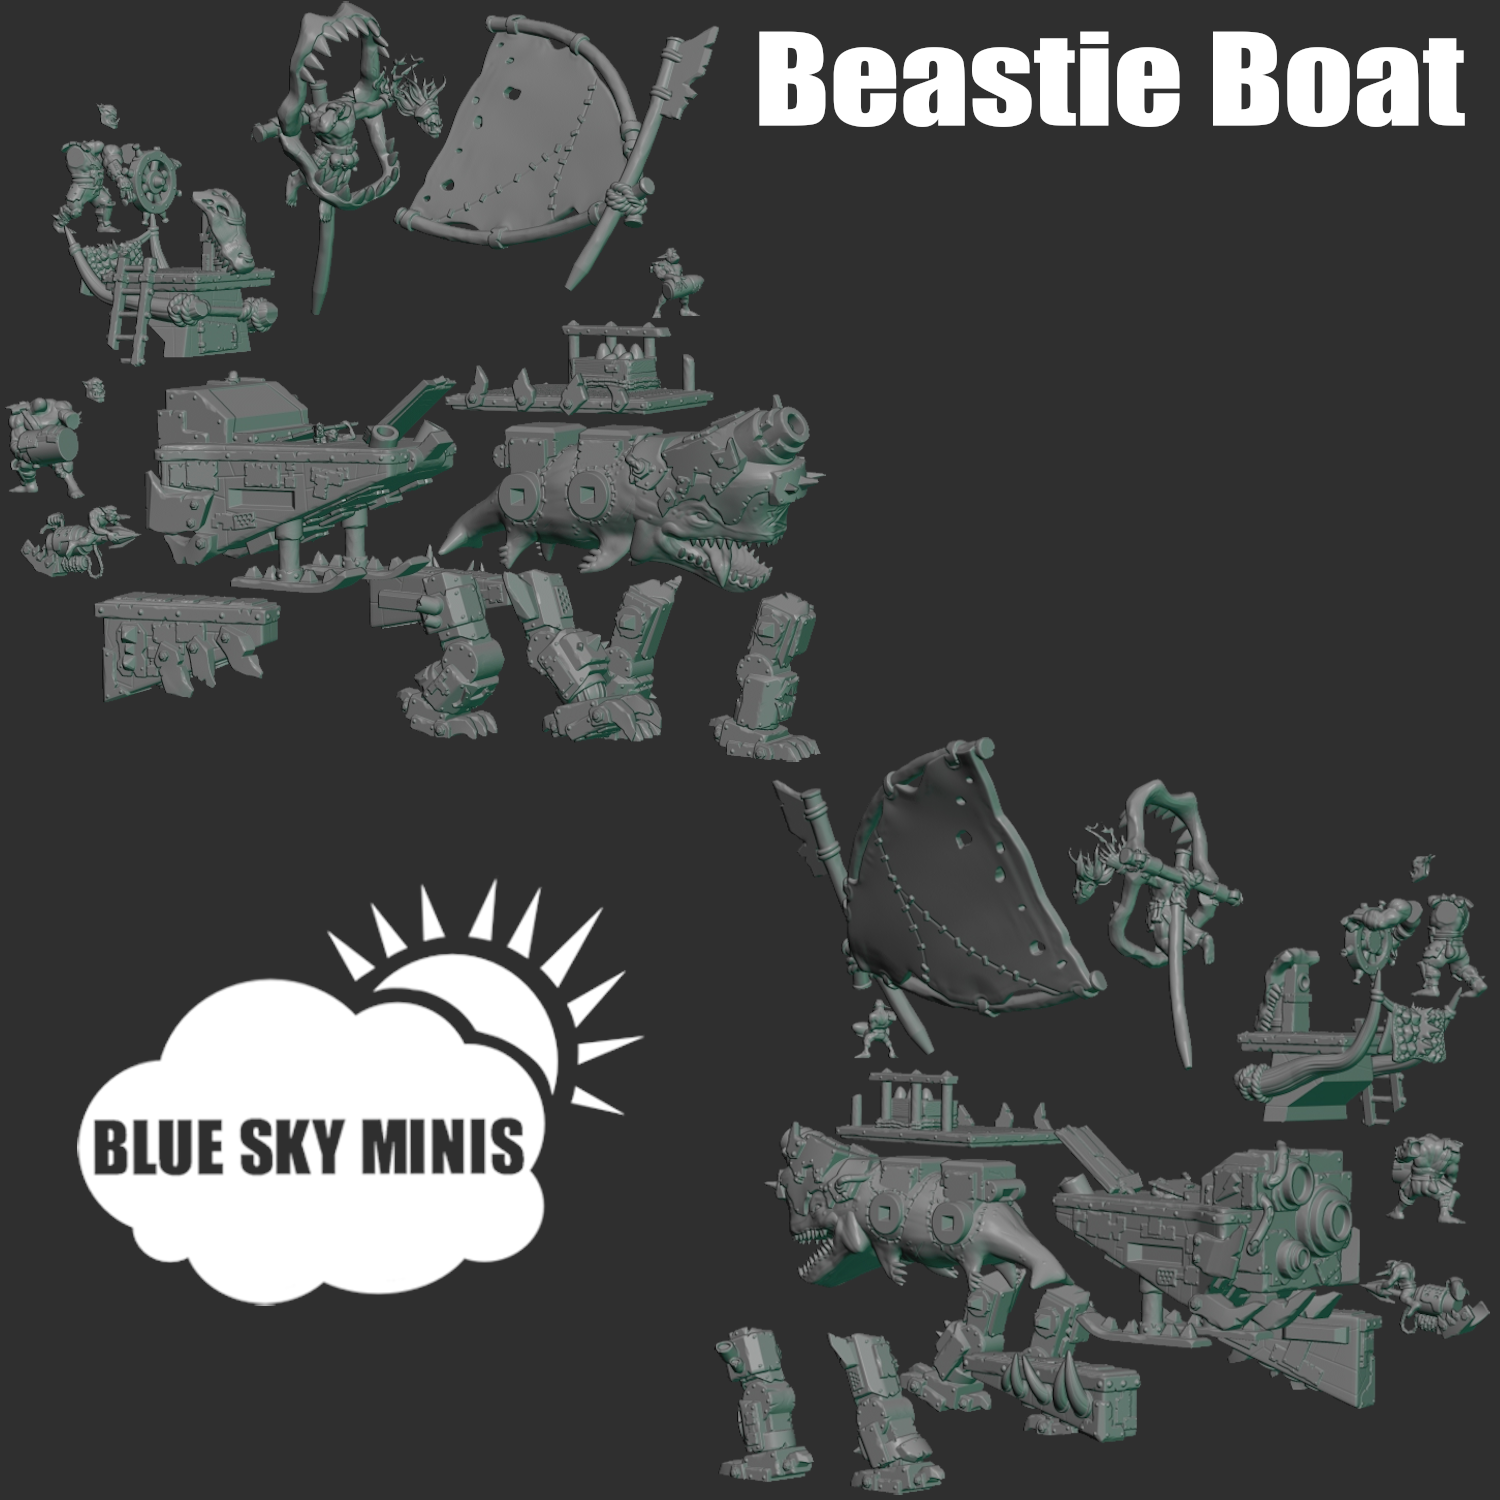 BEASTIE BOAT STORE IMAGE PARTS